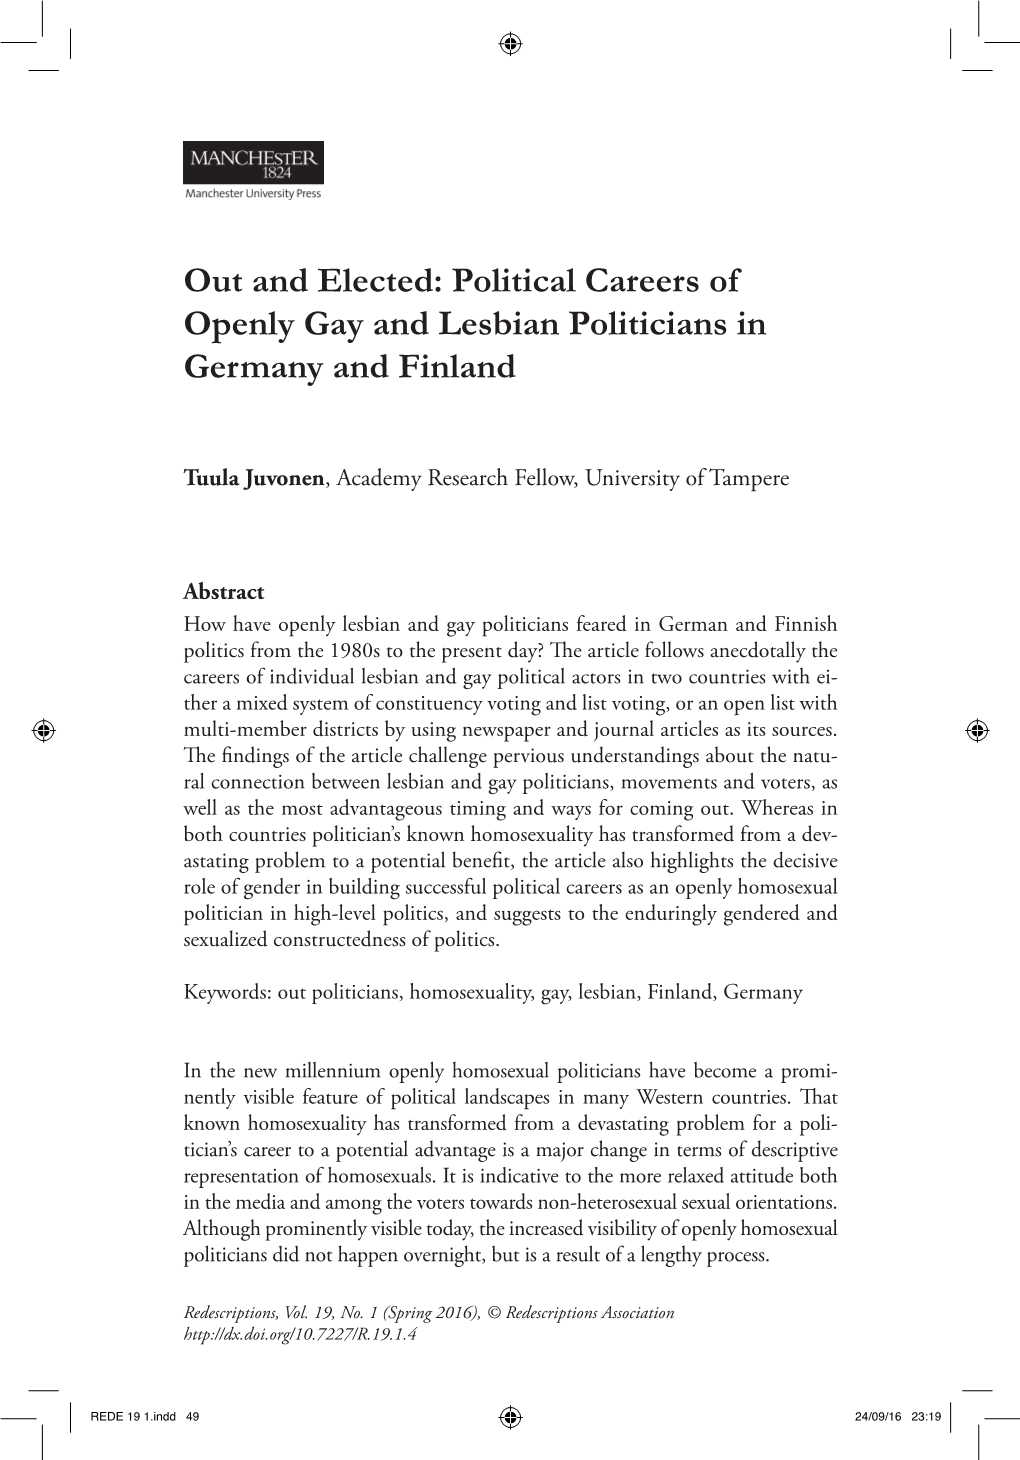 Political Careers of Openly Gay and Lesbian Politicians in Germany and Finland